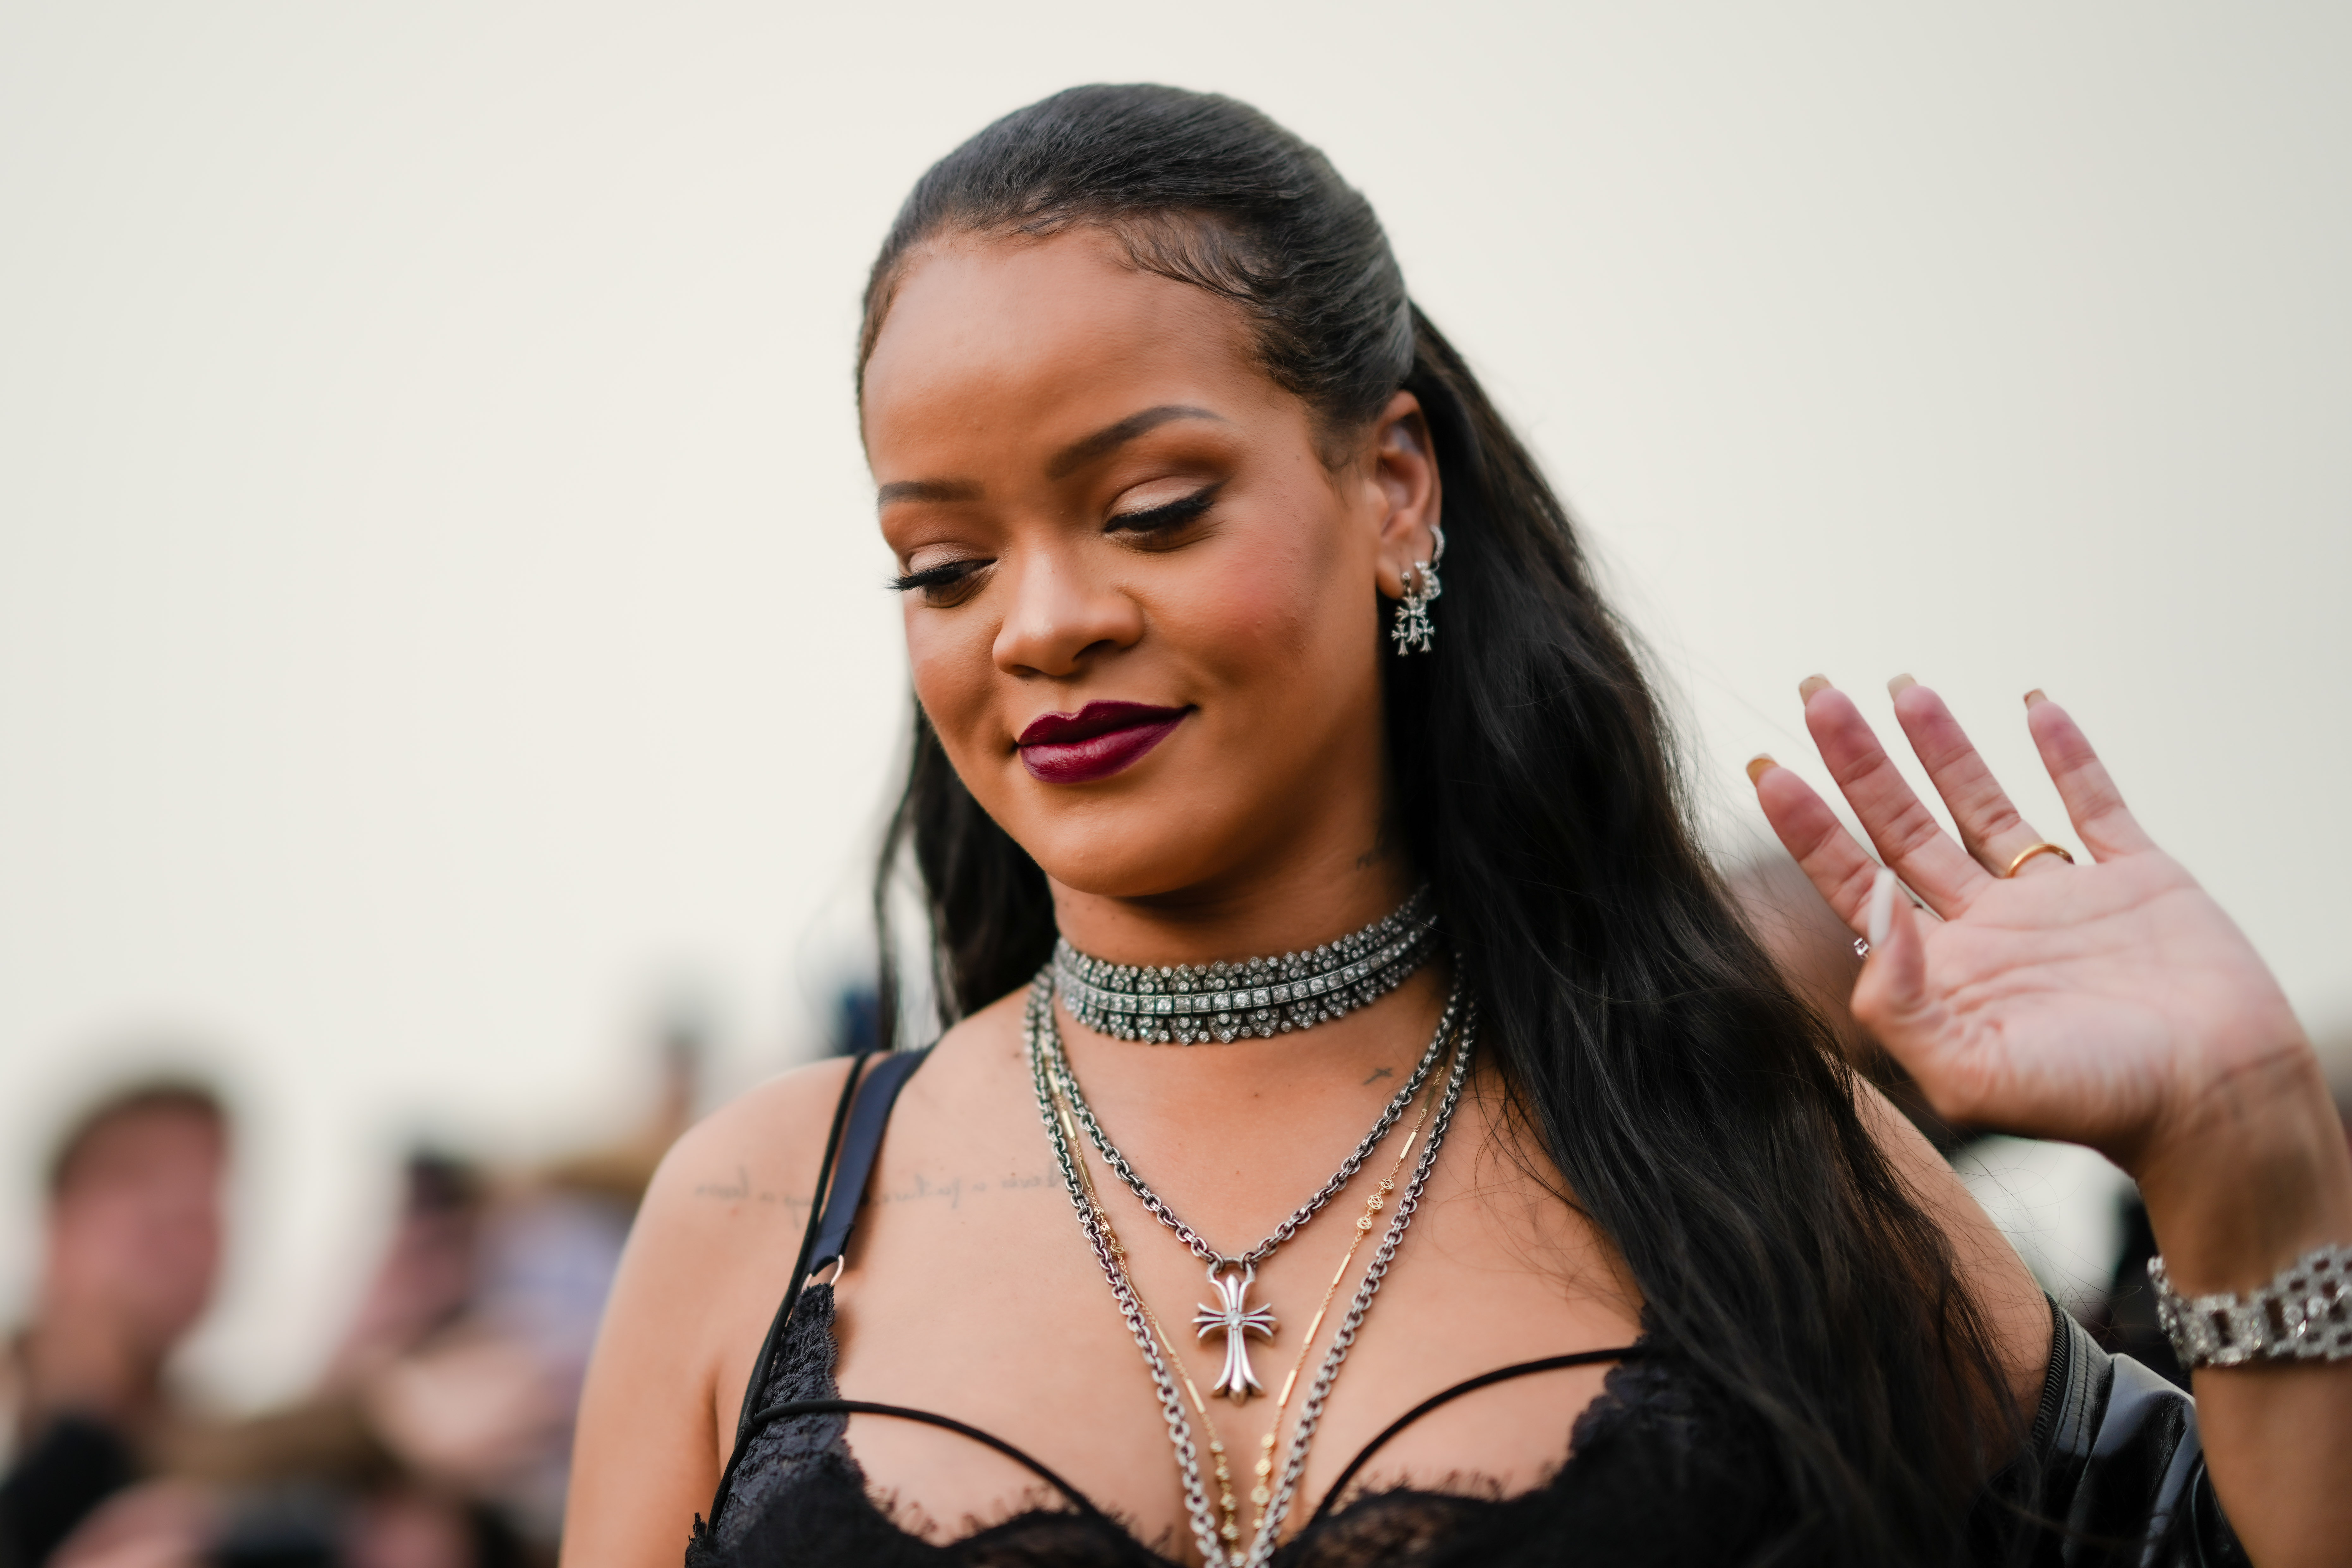 Rihanna is now America's youngest self-made billionaire woman